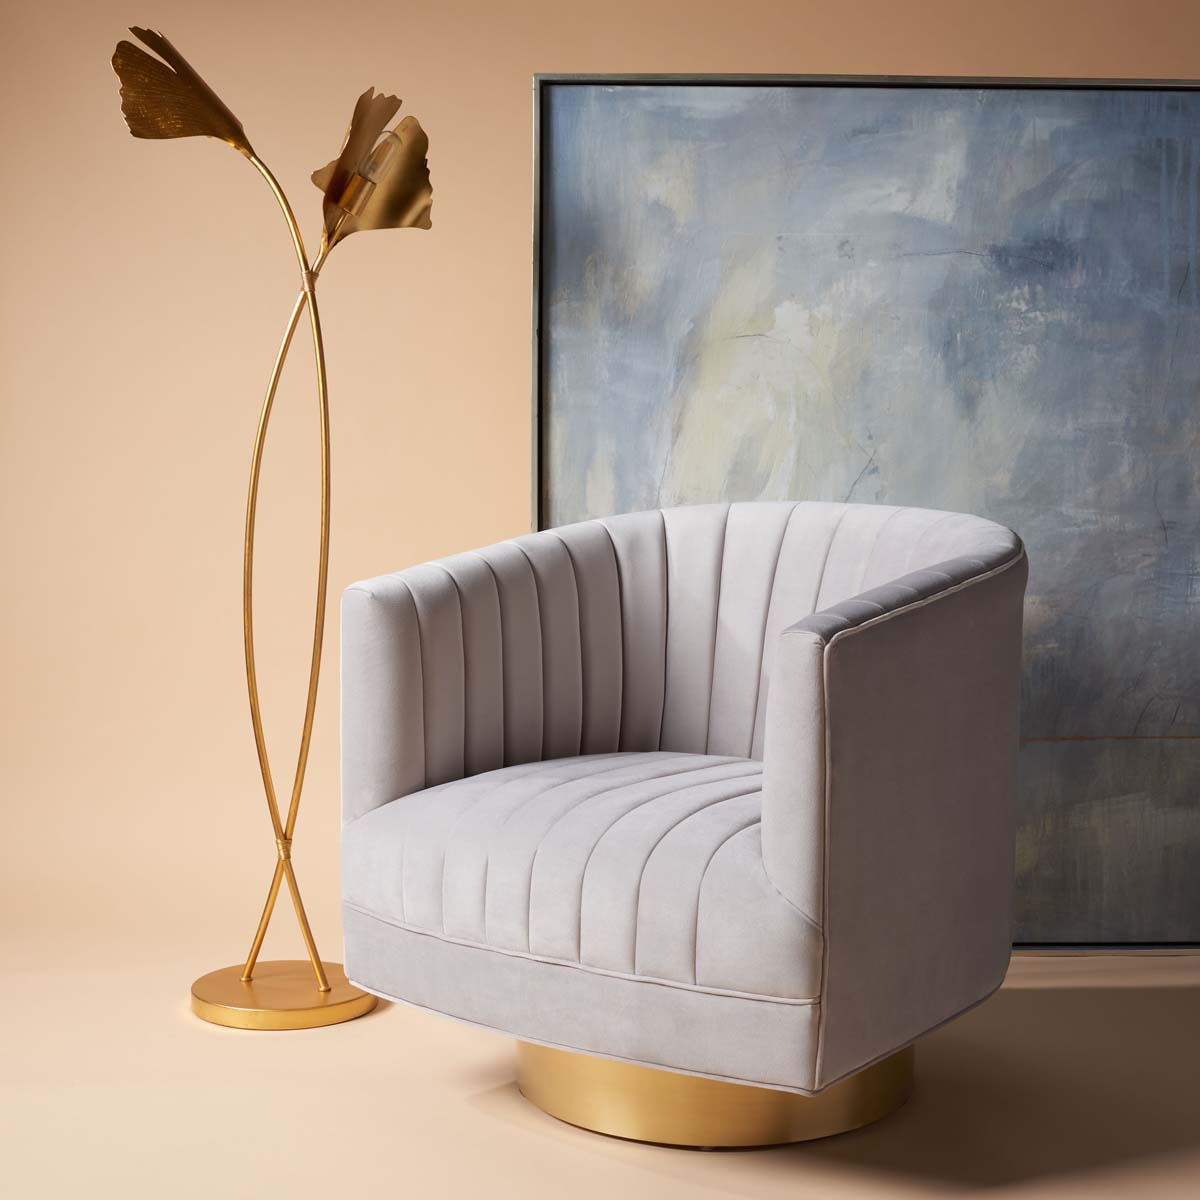 Safavieh Couture Josephine Swivel Barrel Chair - Pale Taupe / Gold